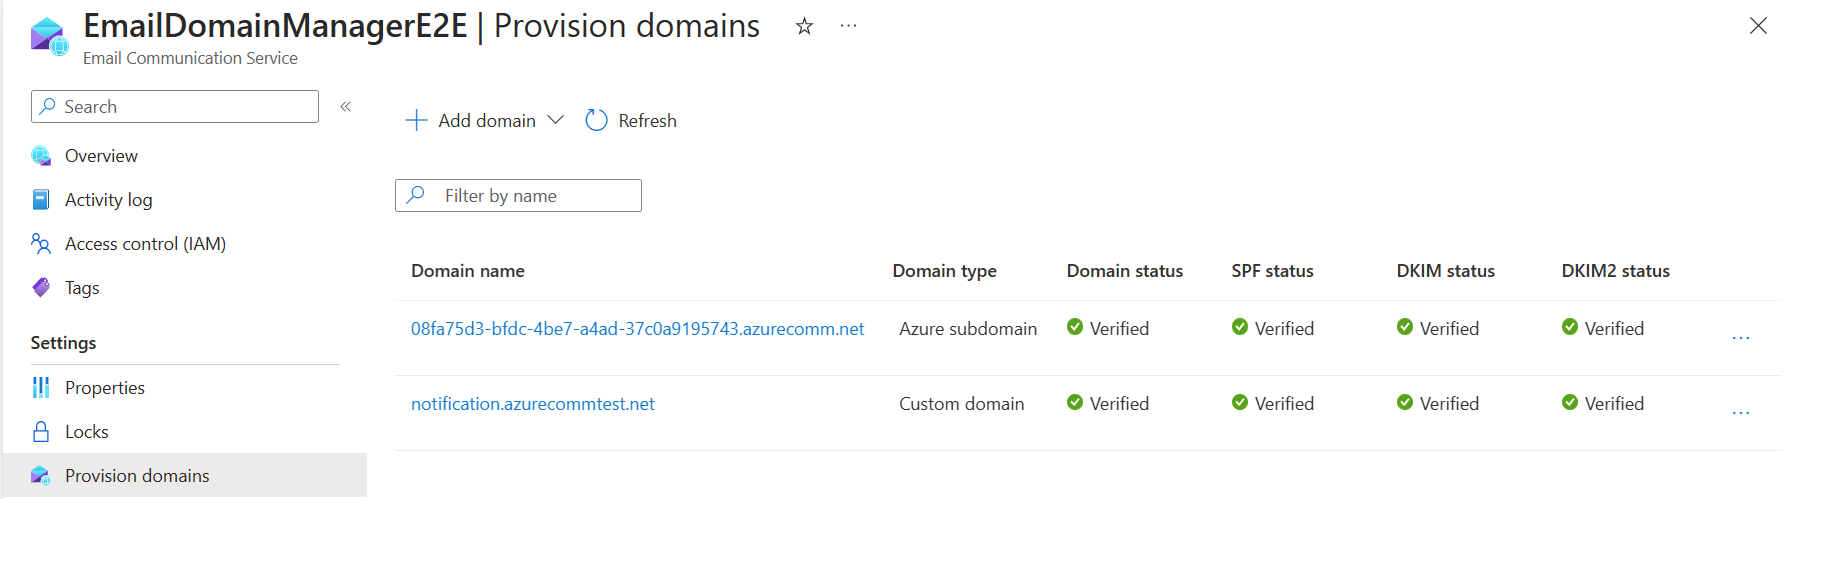 Screenshot that shows Domain link in list of provisioned email domains.